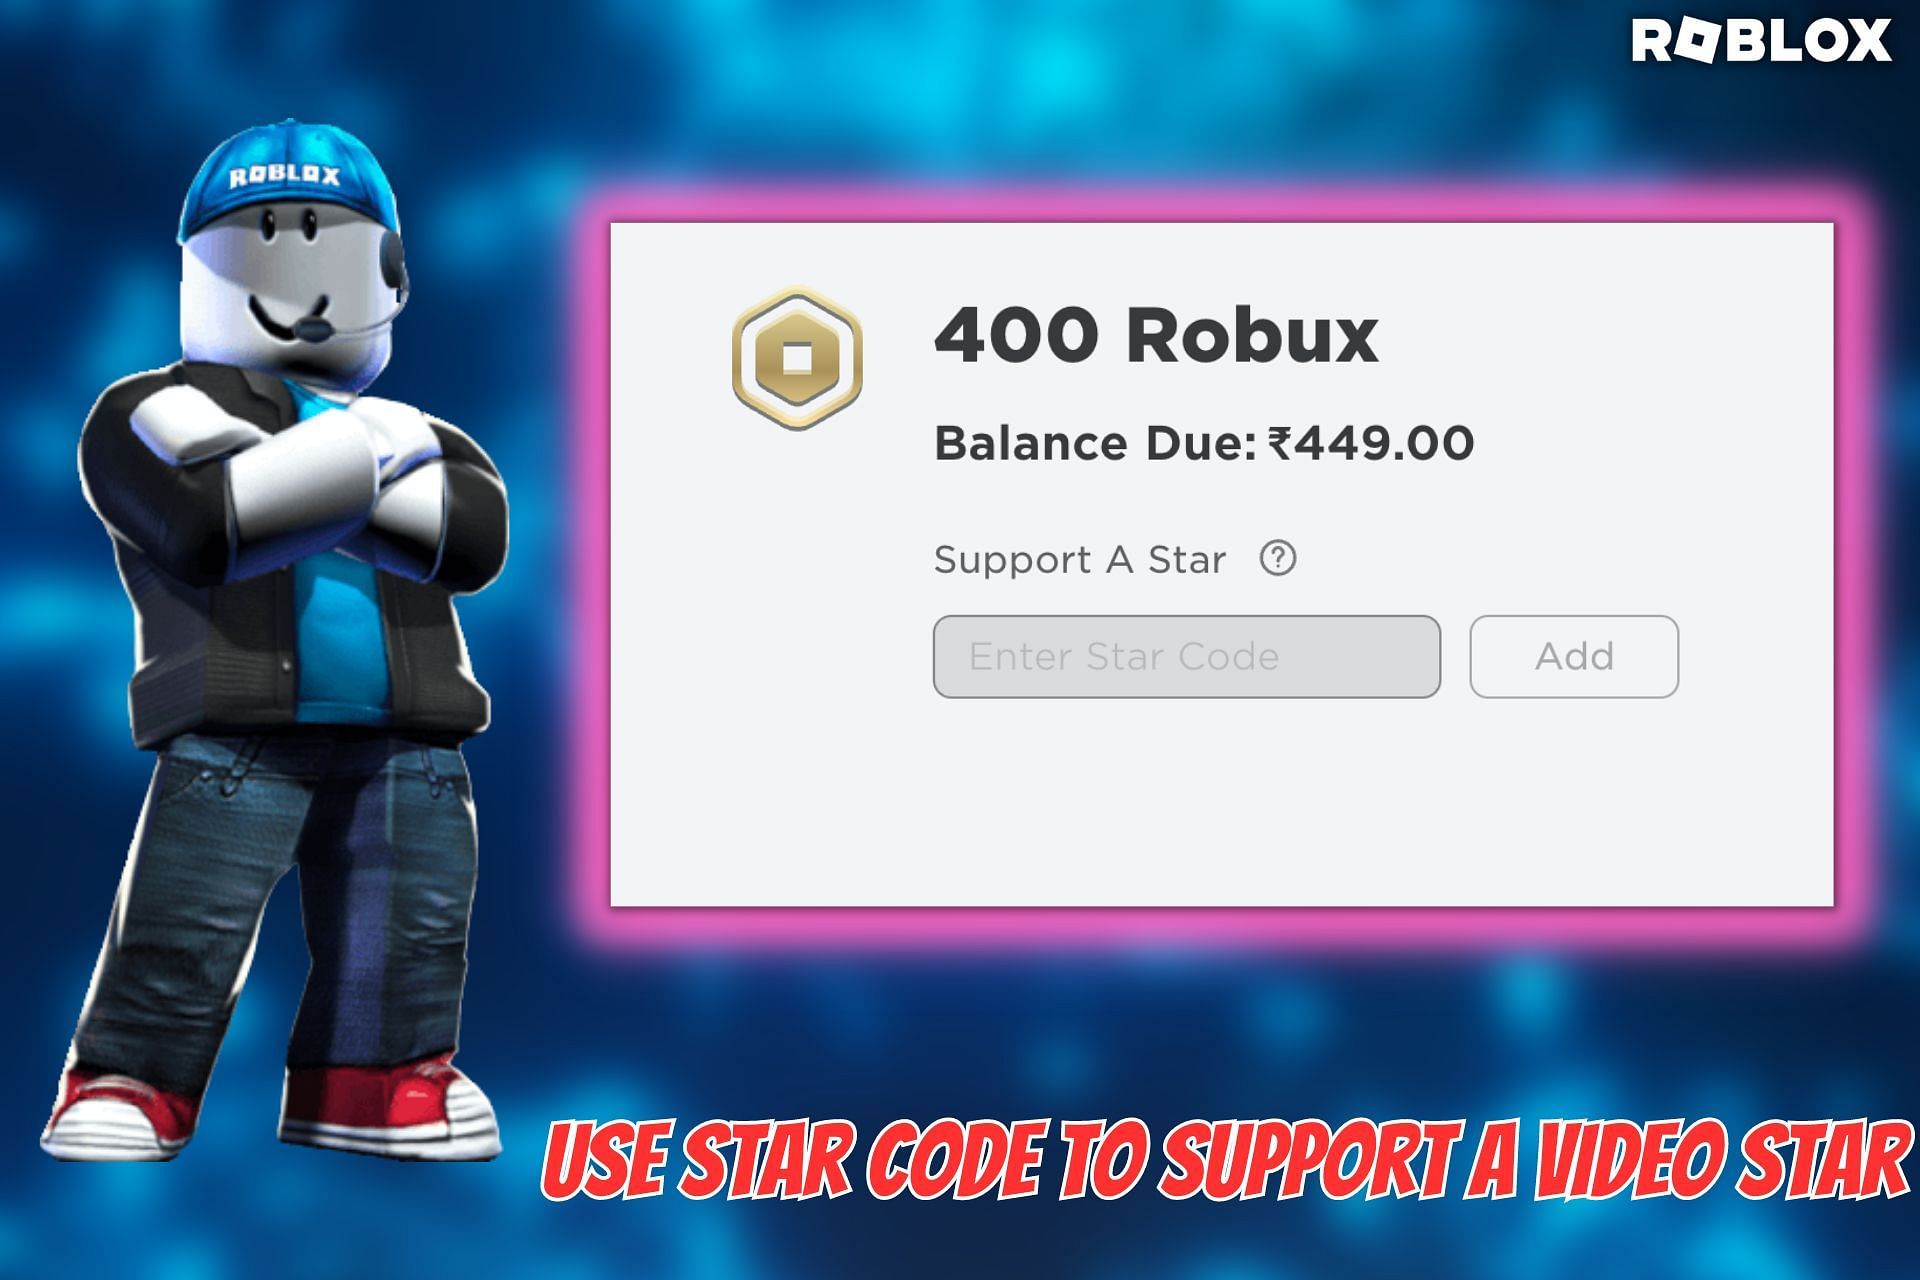 Gift Robux to your favorite Roblox video star (Image via Sportskeeda)